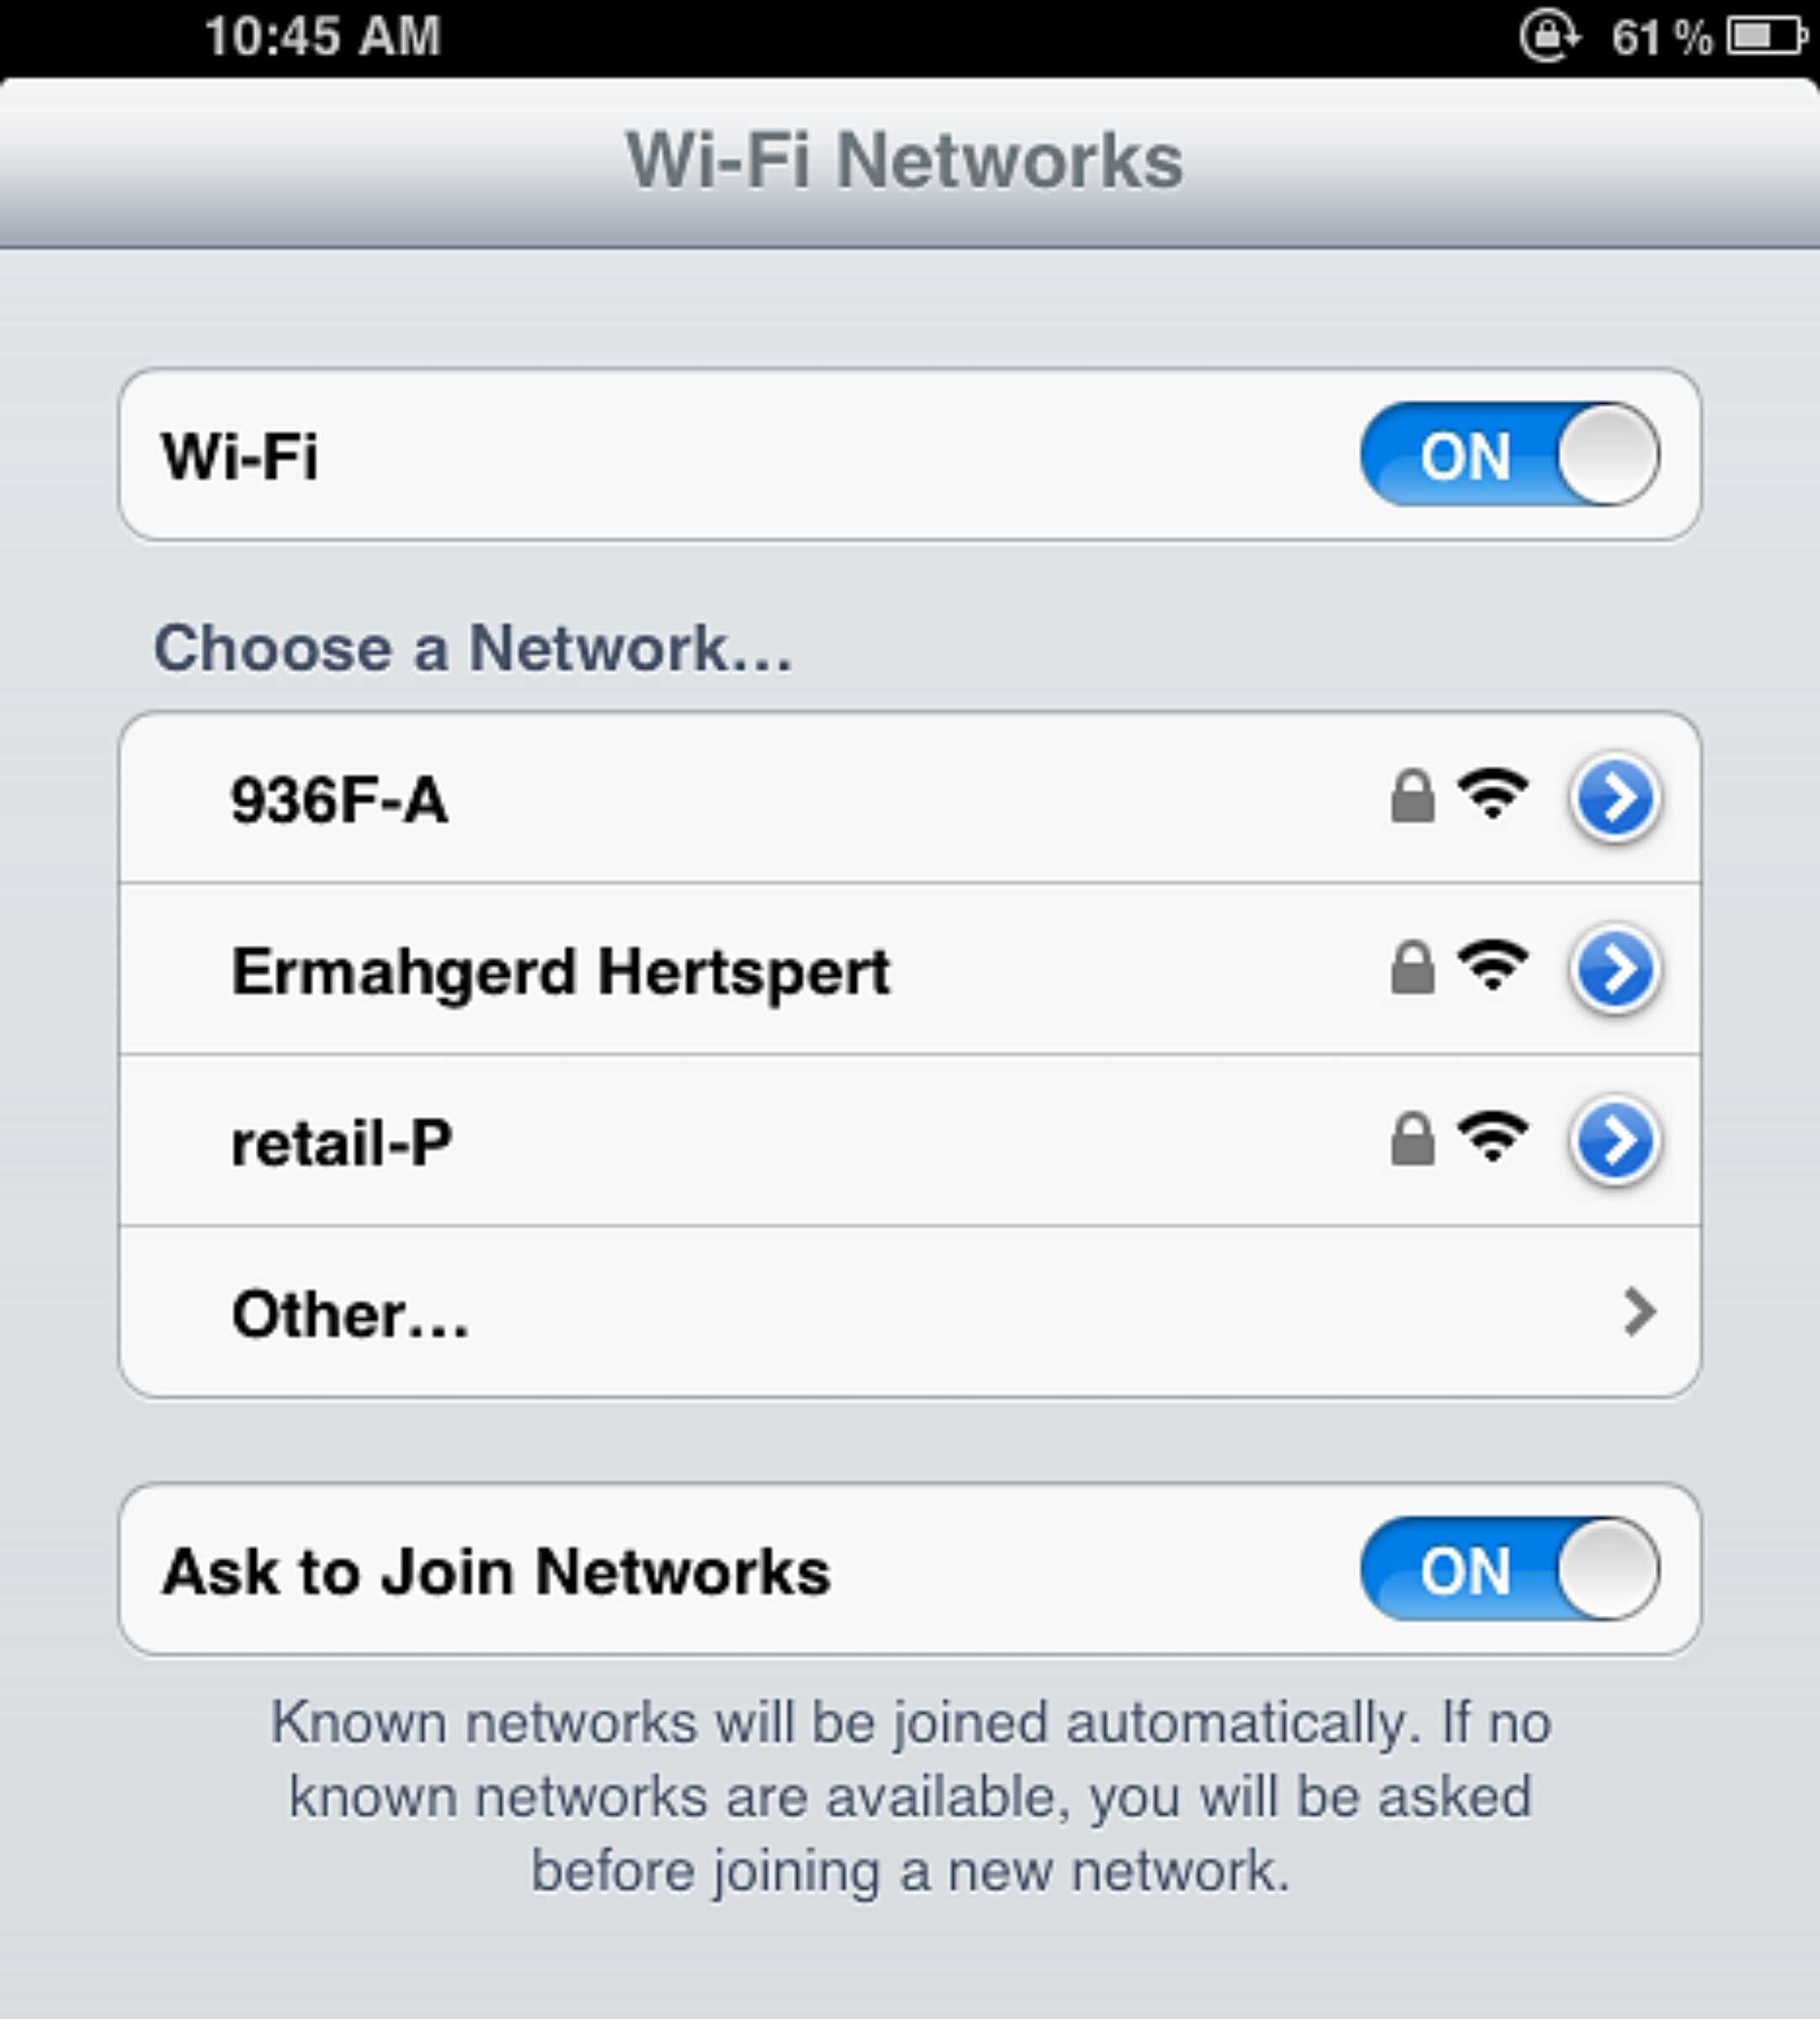 screenshot - 61% O WiFi Networks WiFi On Choose a Network... 936FA Ermahgerd Hertspert retailP Other... Ask to Join Networks On Known networks will be joined automatically. If no known networks are available, you will be asked before joining a new network